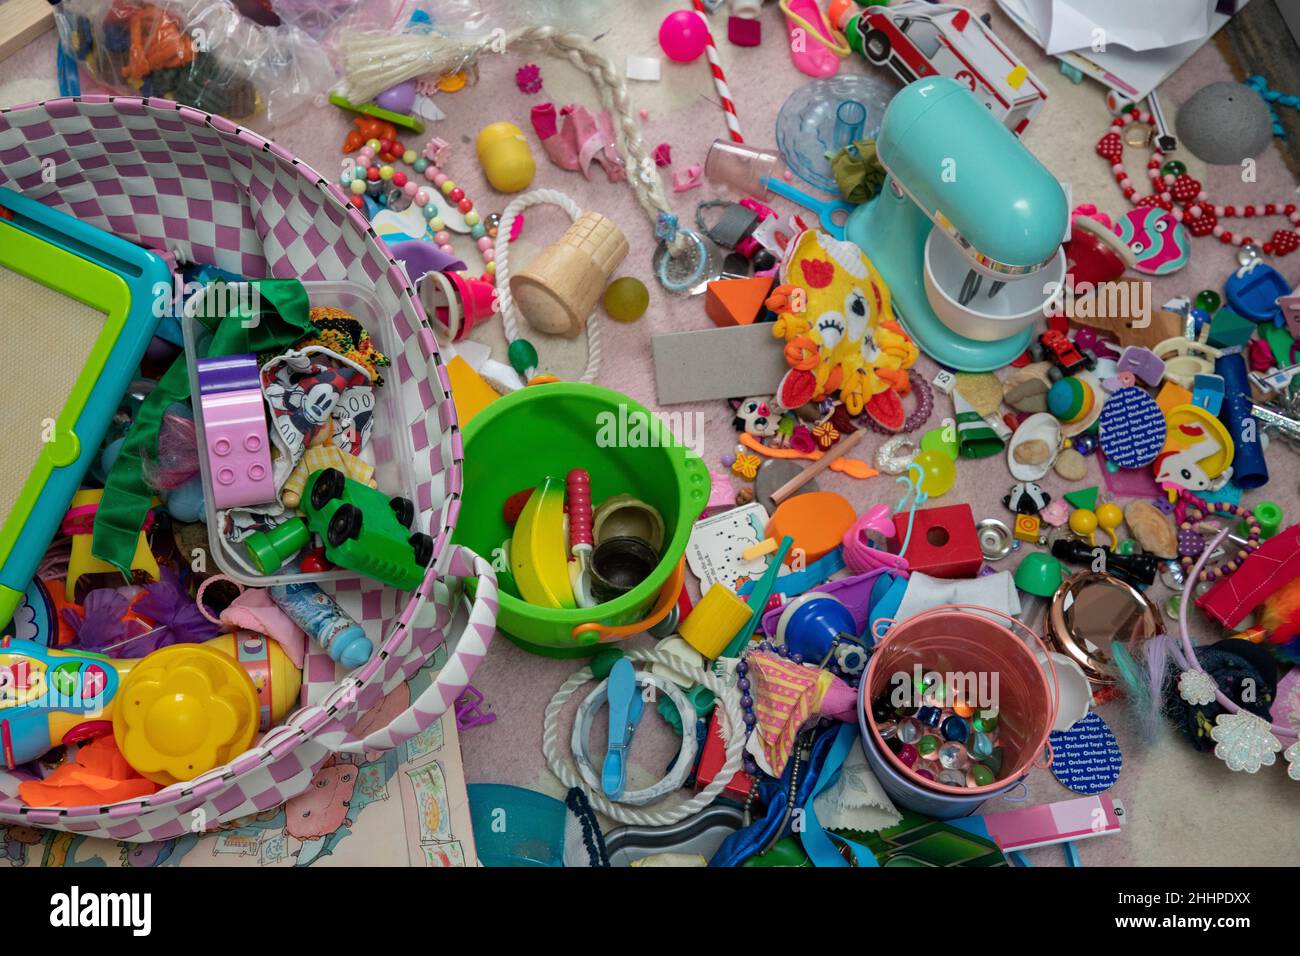 Assorted miscellaneous small children’s toys on a carpet Stock Photo